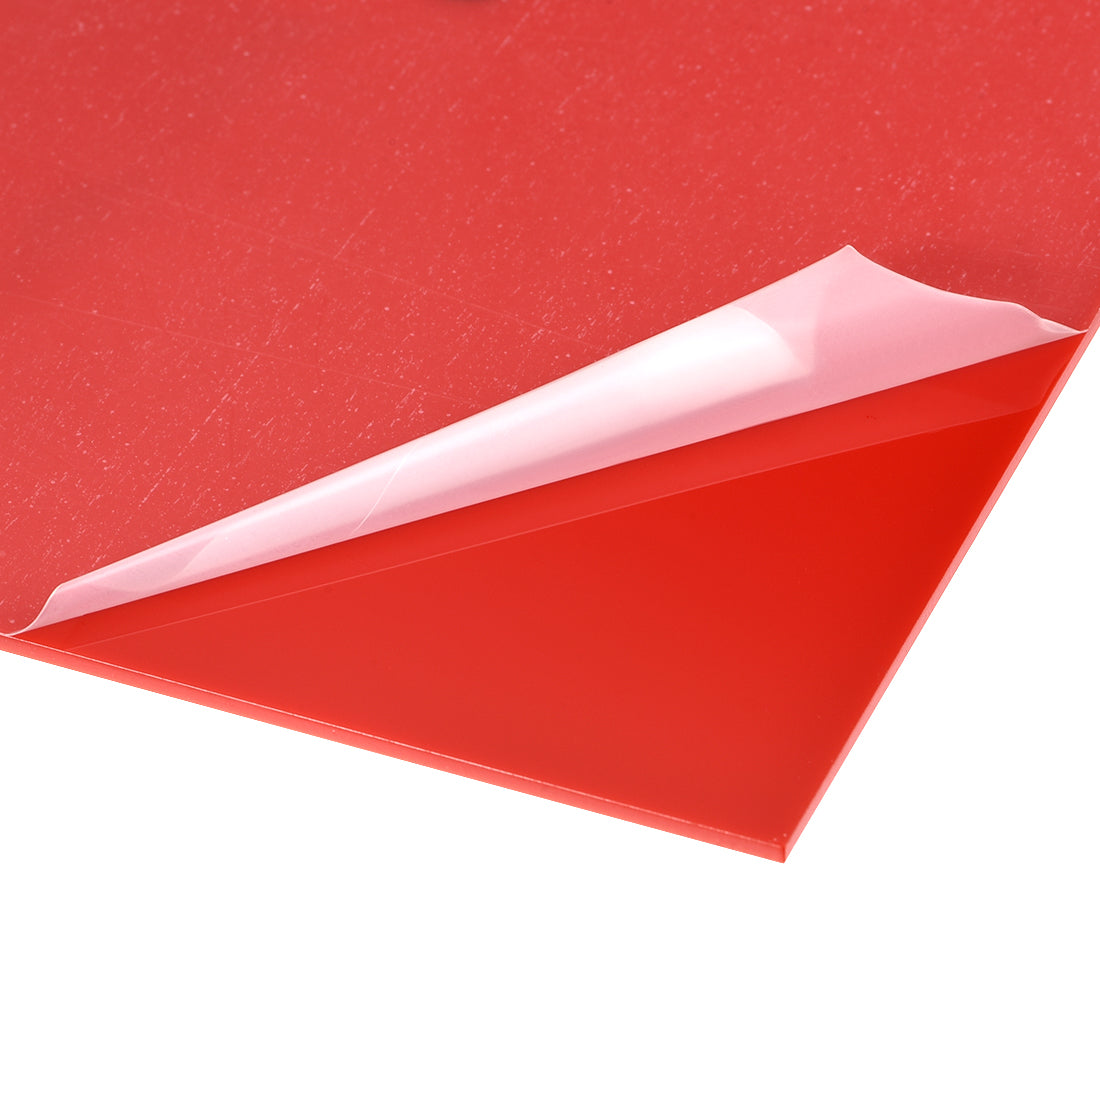 uxcell Uxcell Acrylic Sheet Clear Cast,Red,2.36 x 4.72-Inch,0.07inch Thick